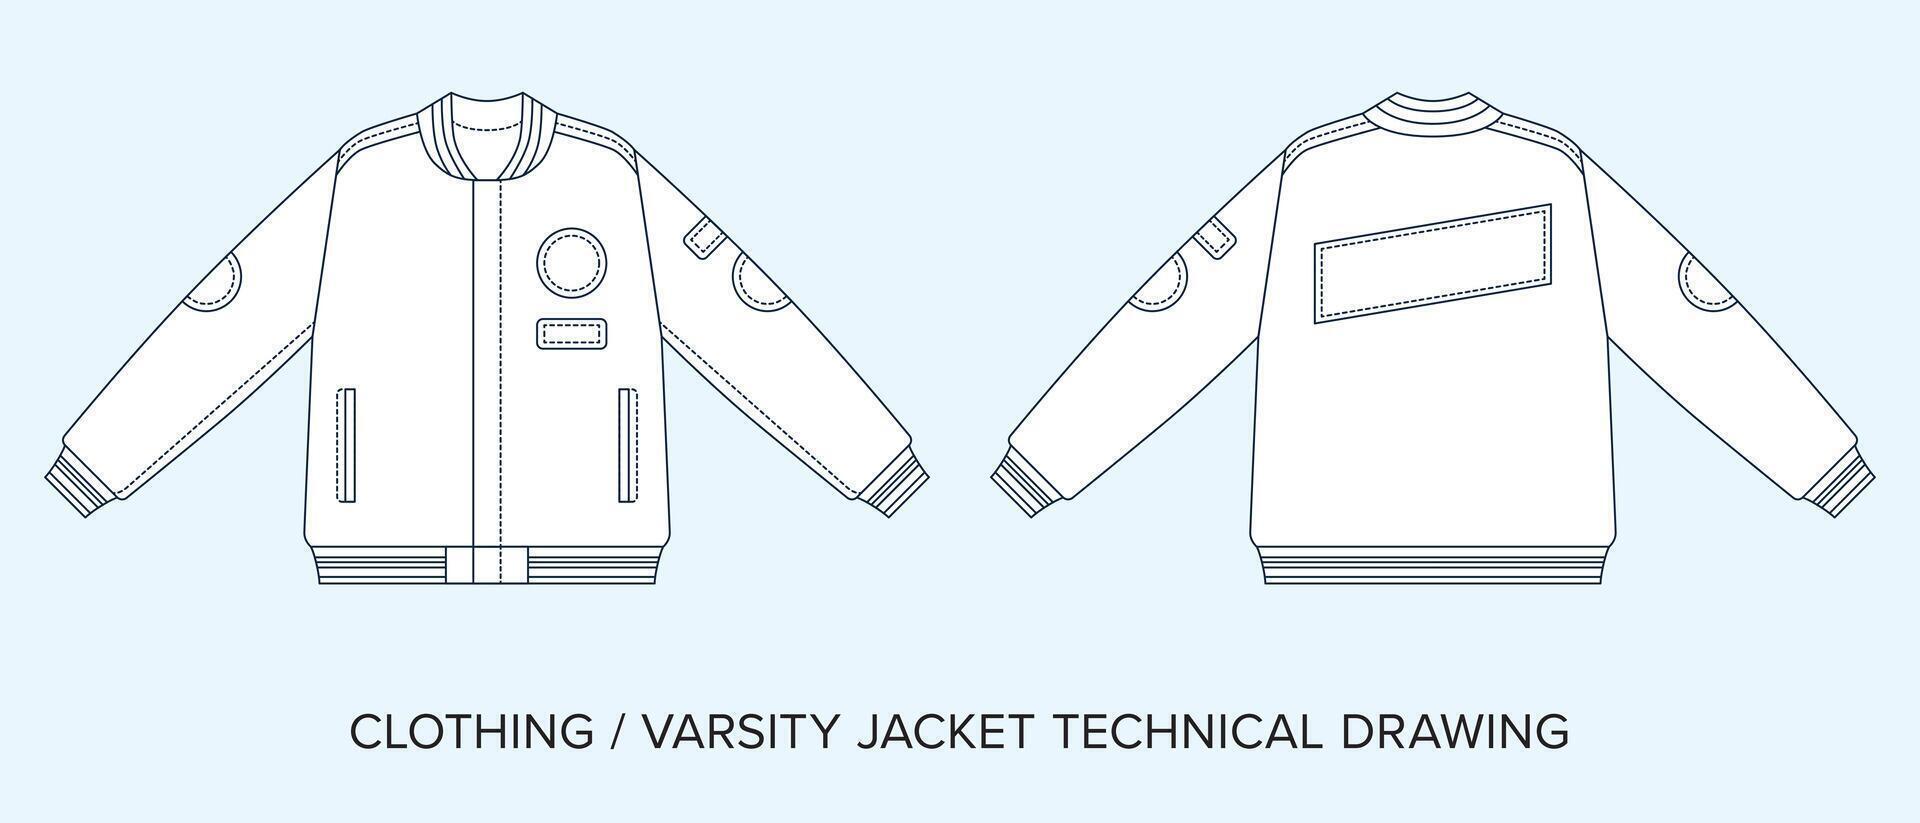 Varsity Jacket with Pockets and Patches, Technical Drawing, Apparel Blueprint for Fashion Designers vector